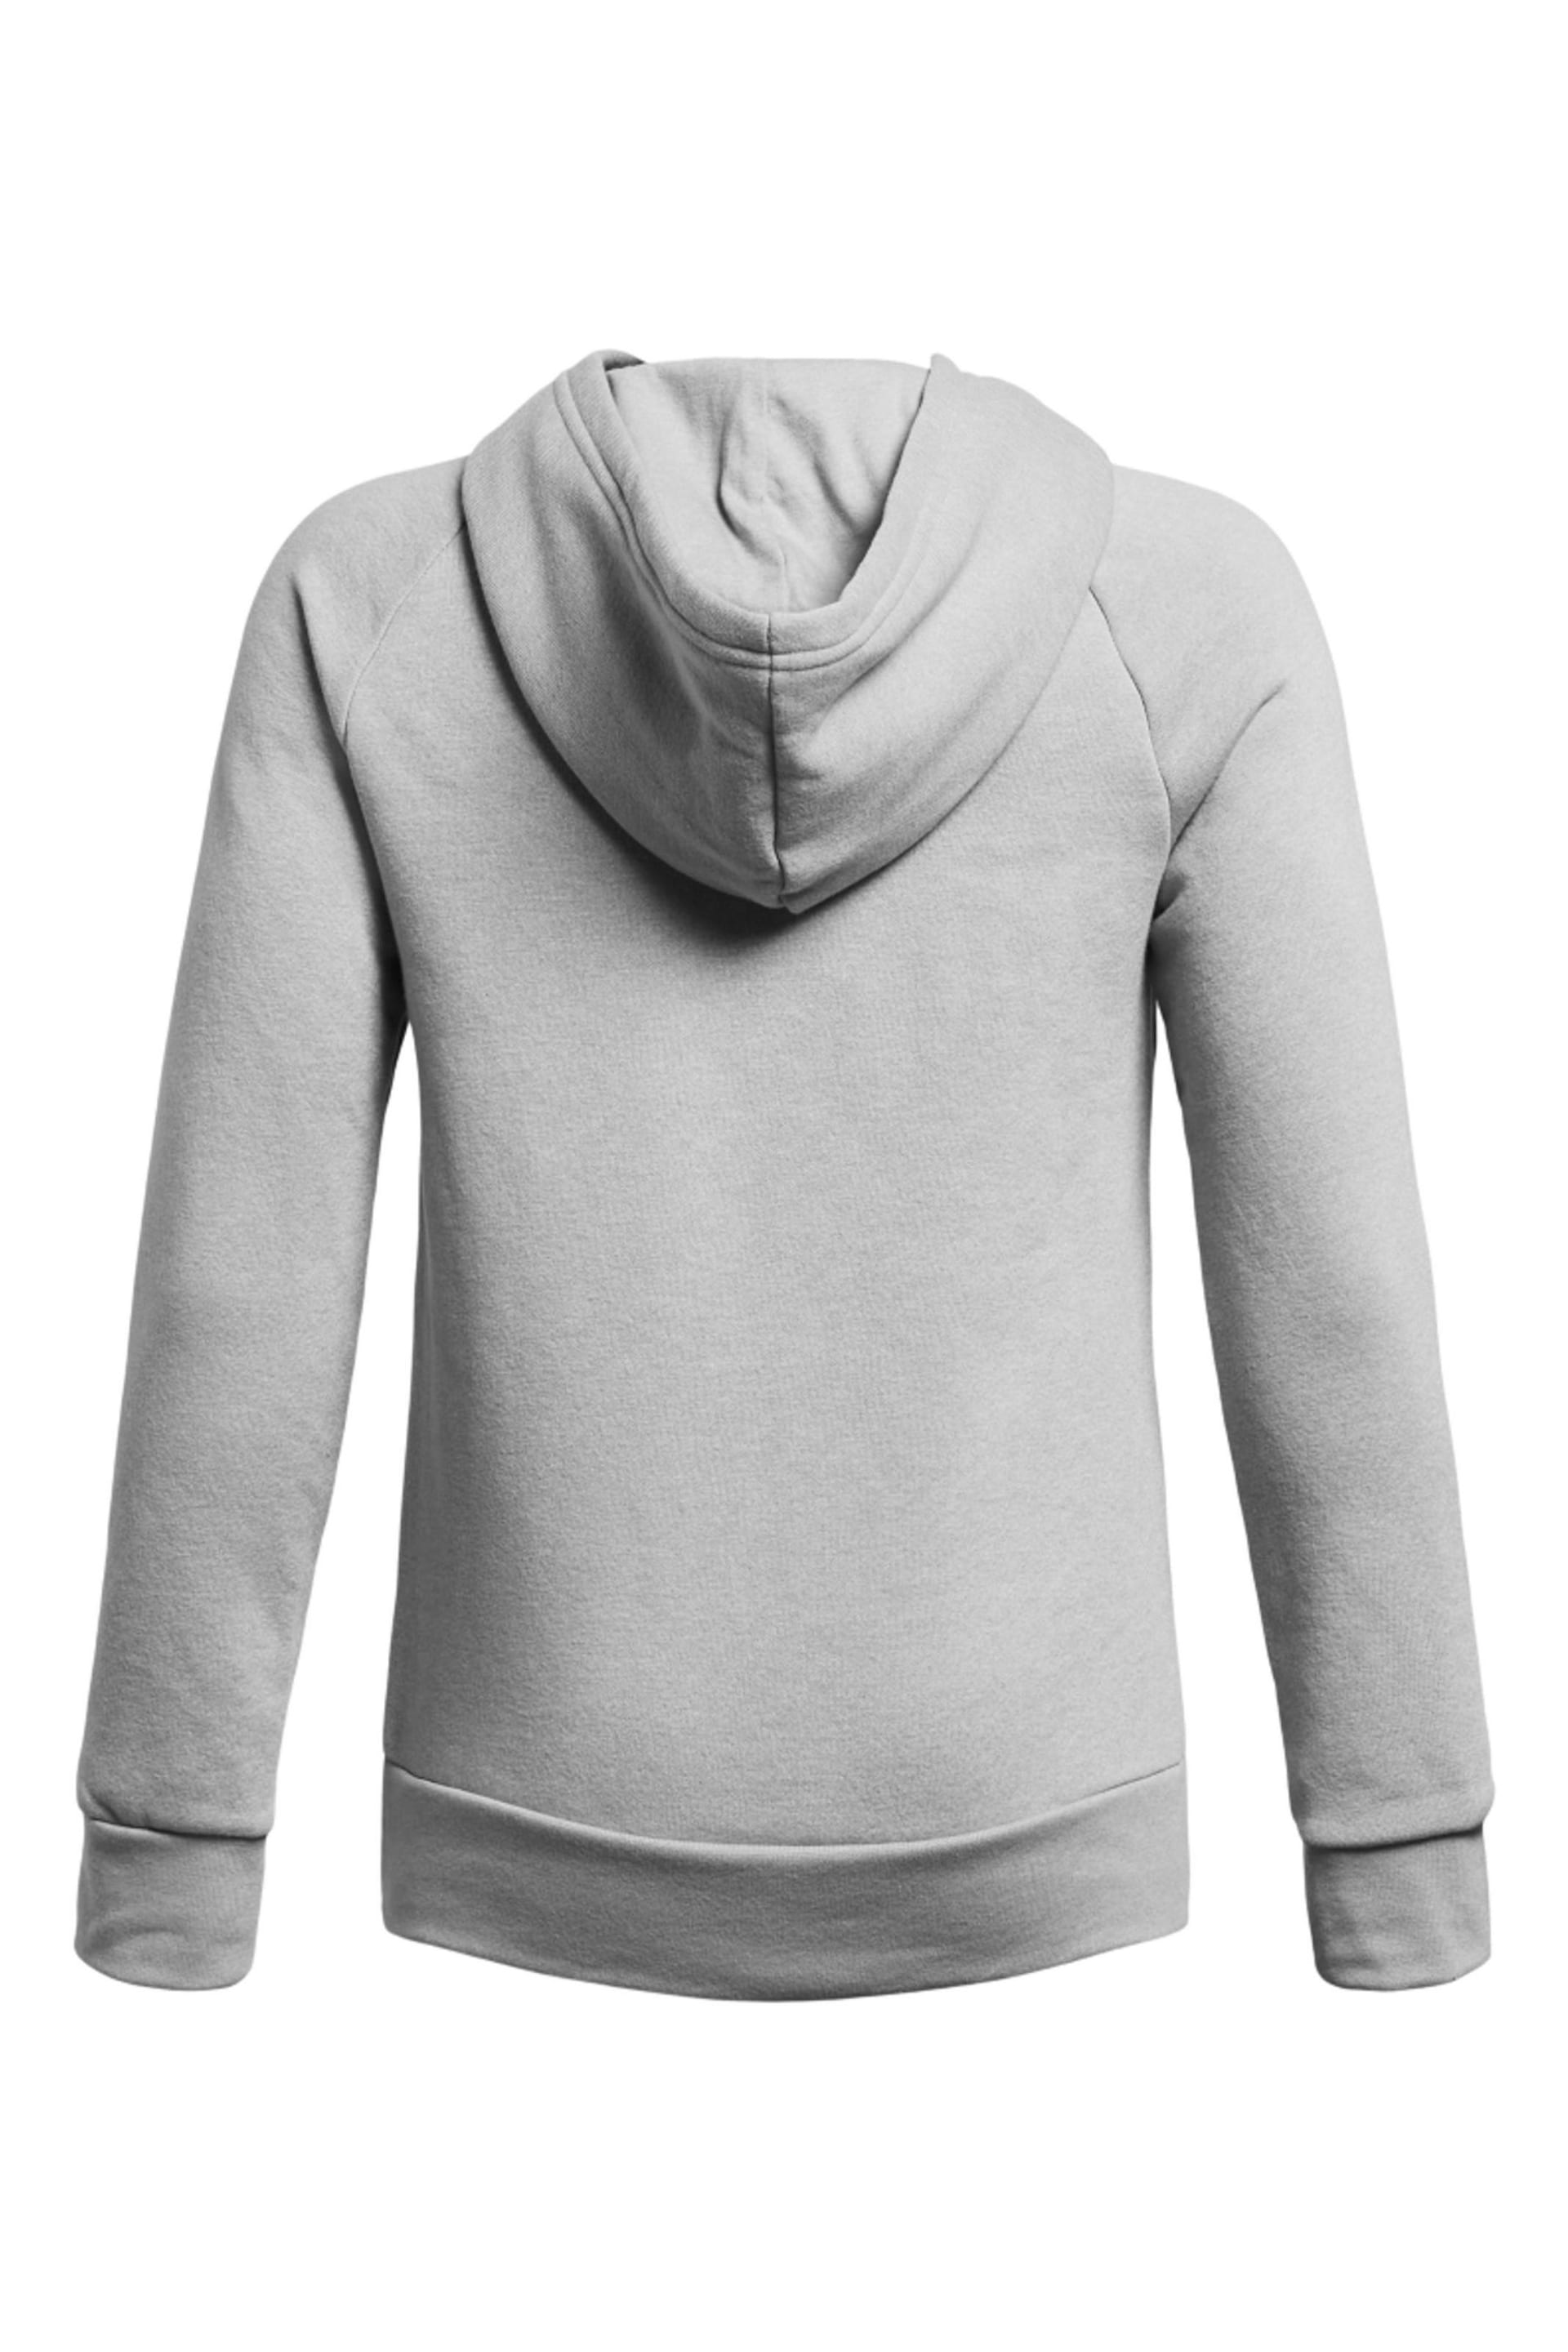 Under Armour Grey Rival Fleece BL Hoodie - Image 2 of 2